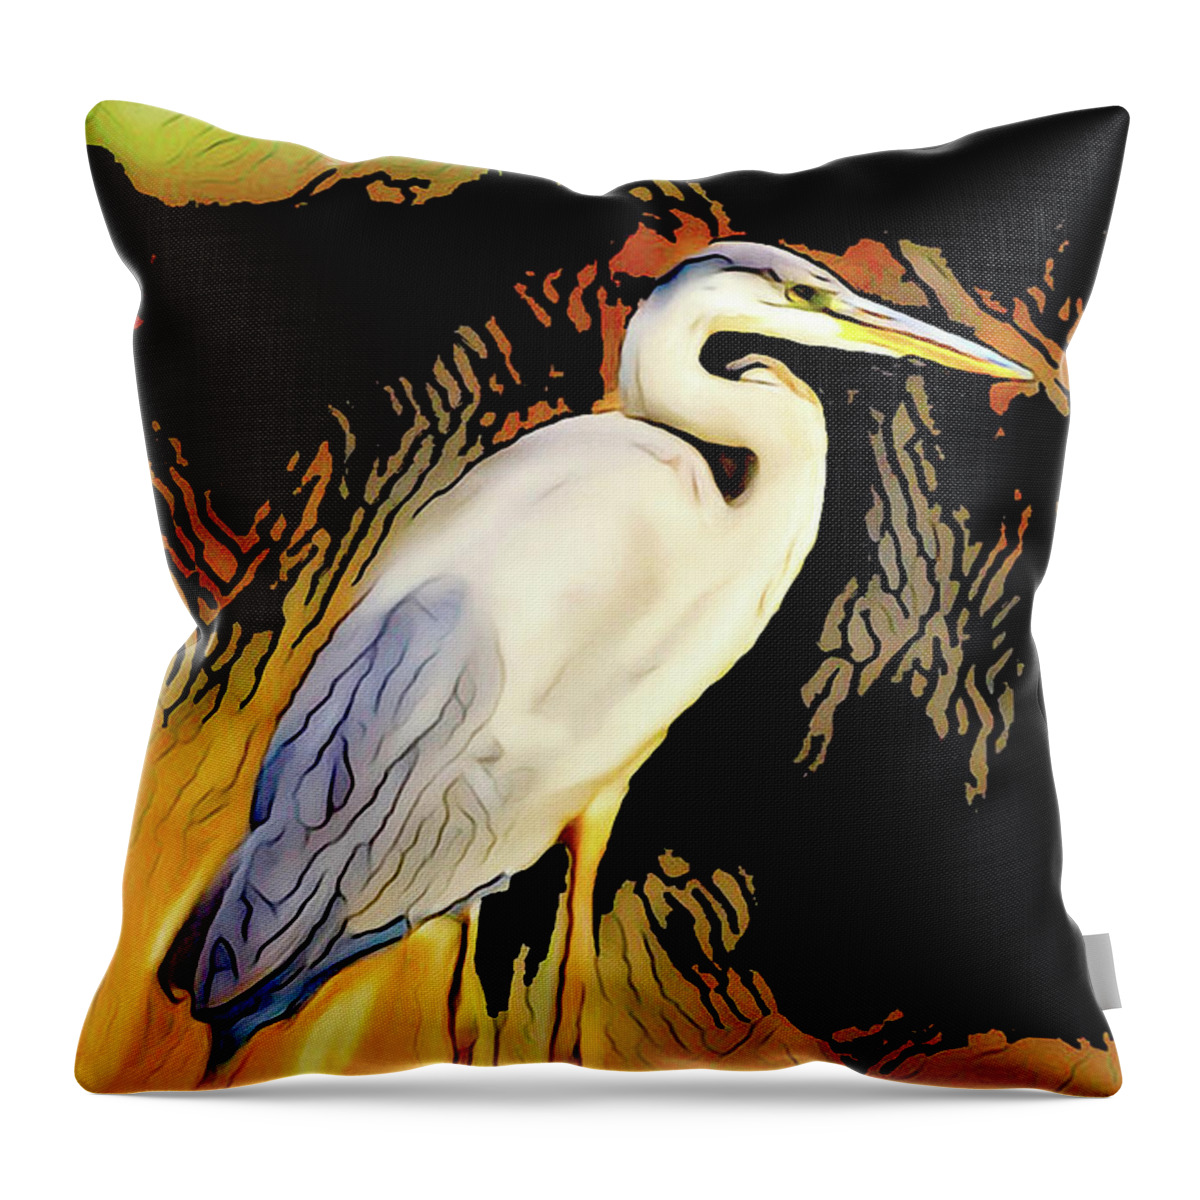 Blue Heron Throw Pillow featuring the digital art Blue Heron Black/Gold by Don Wright